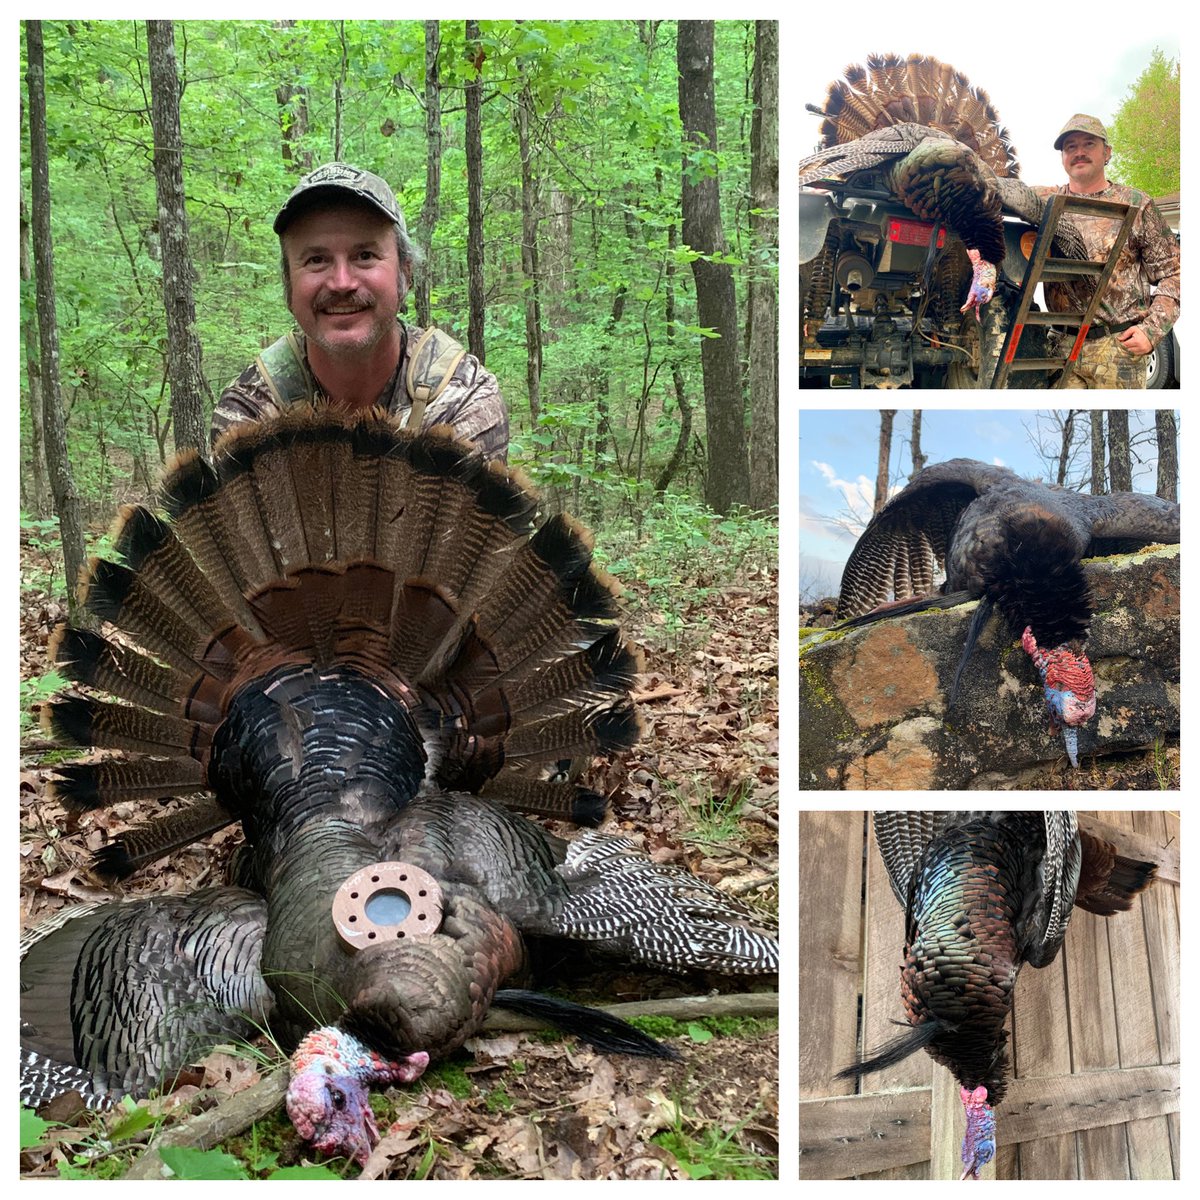 #TaggedOut  in Tennessee. Sure was fun chasing these birds. #CantStopTheFlop #TurkeySeason2020